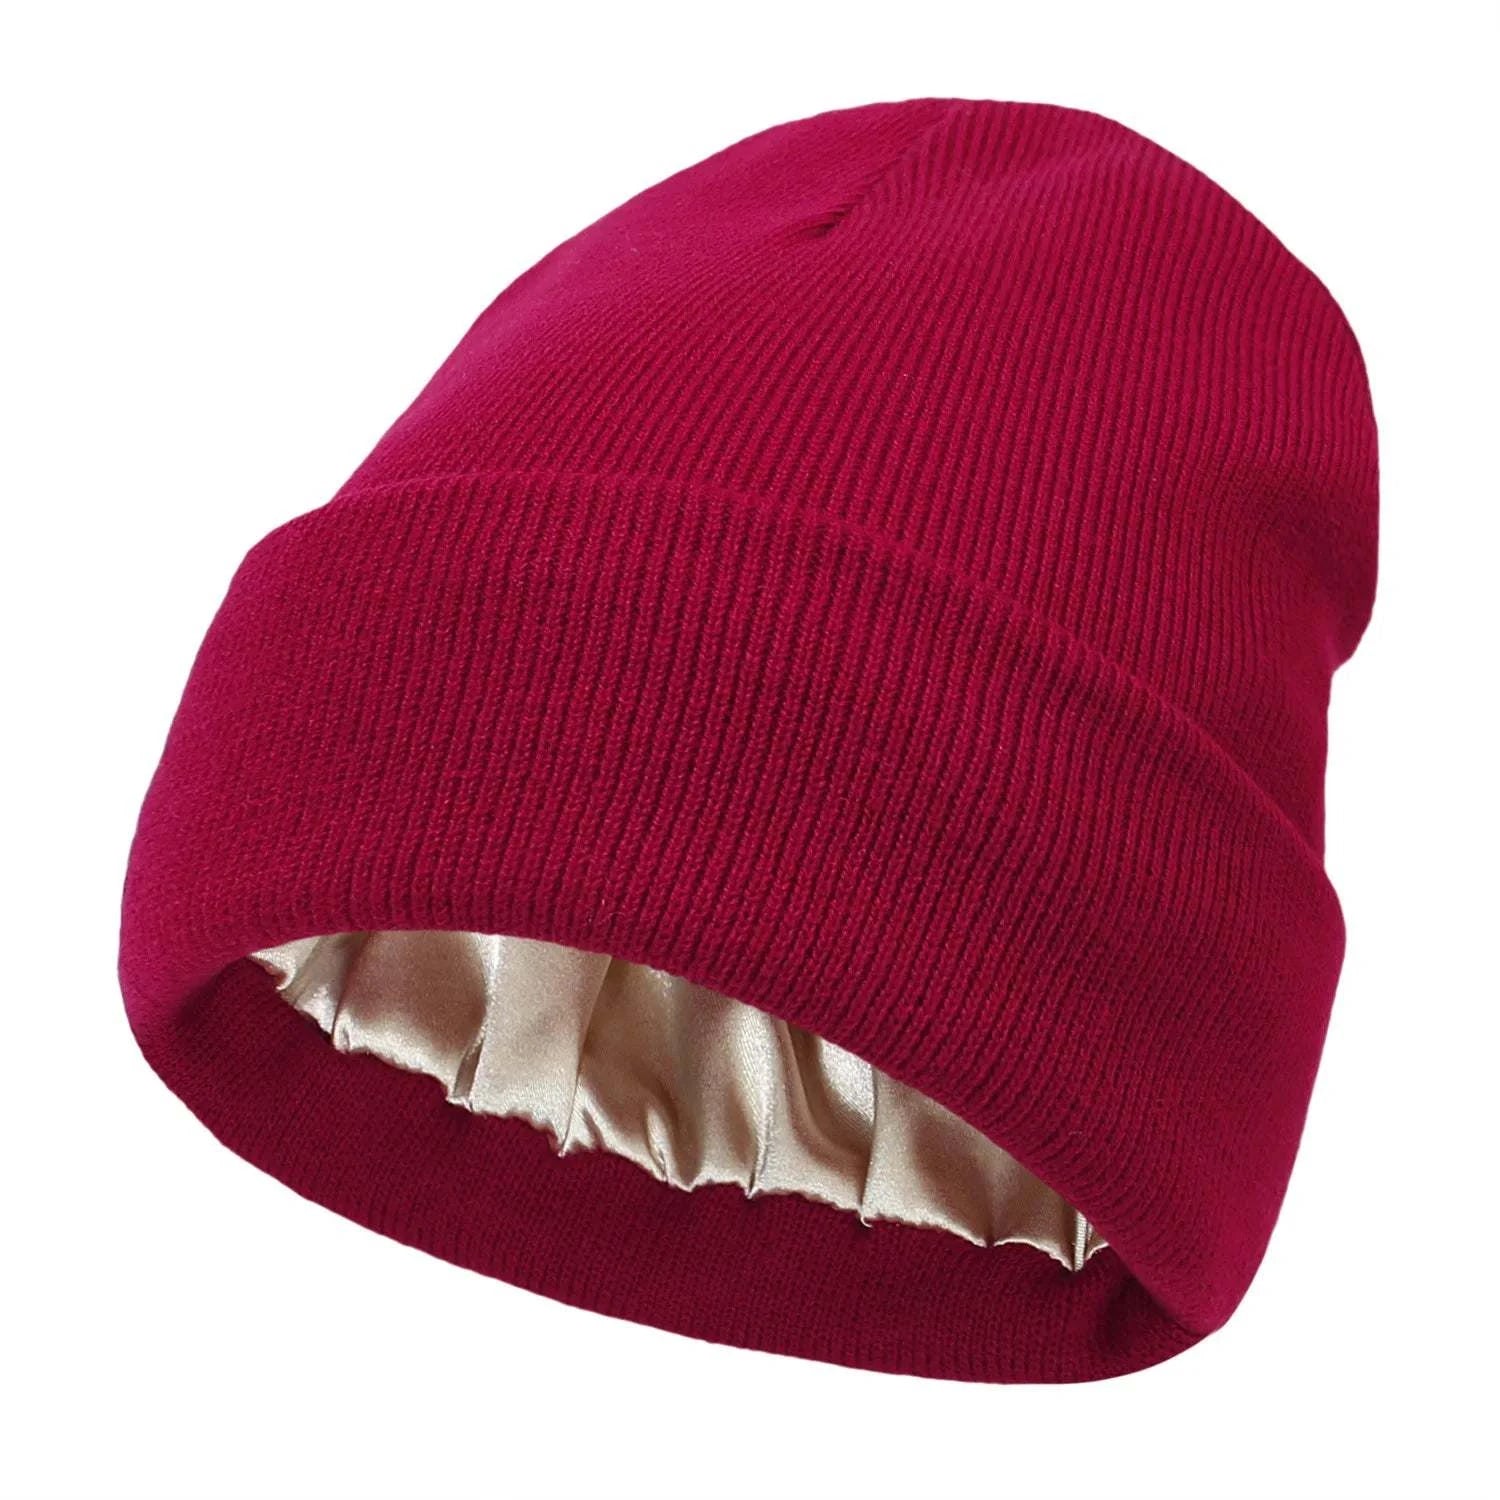 New design silk lined winter knitted hats beanies satin lined knit bea